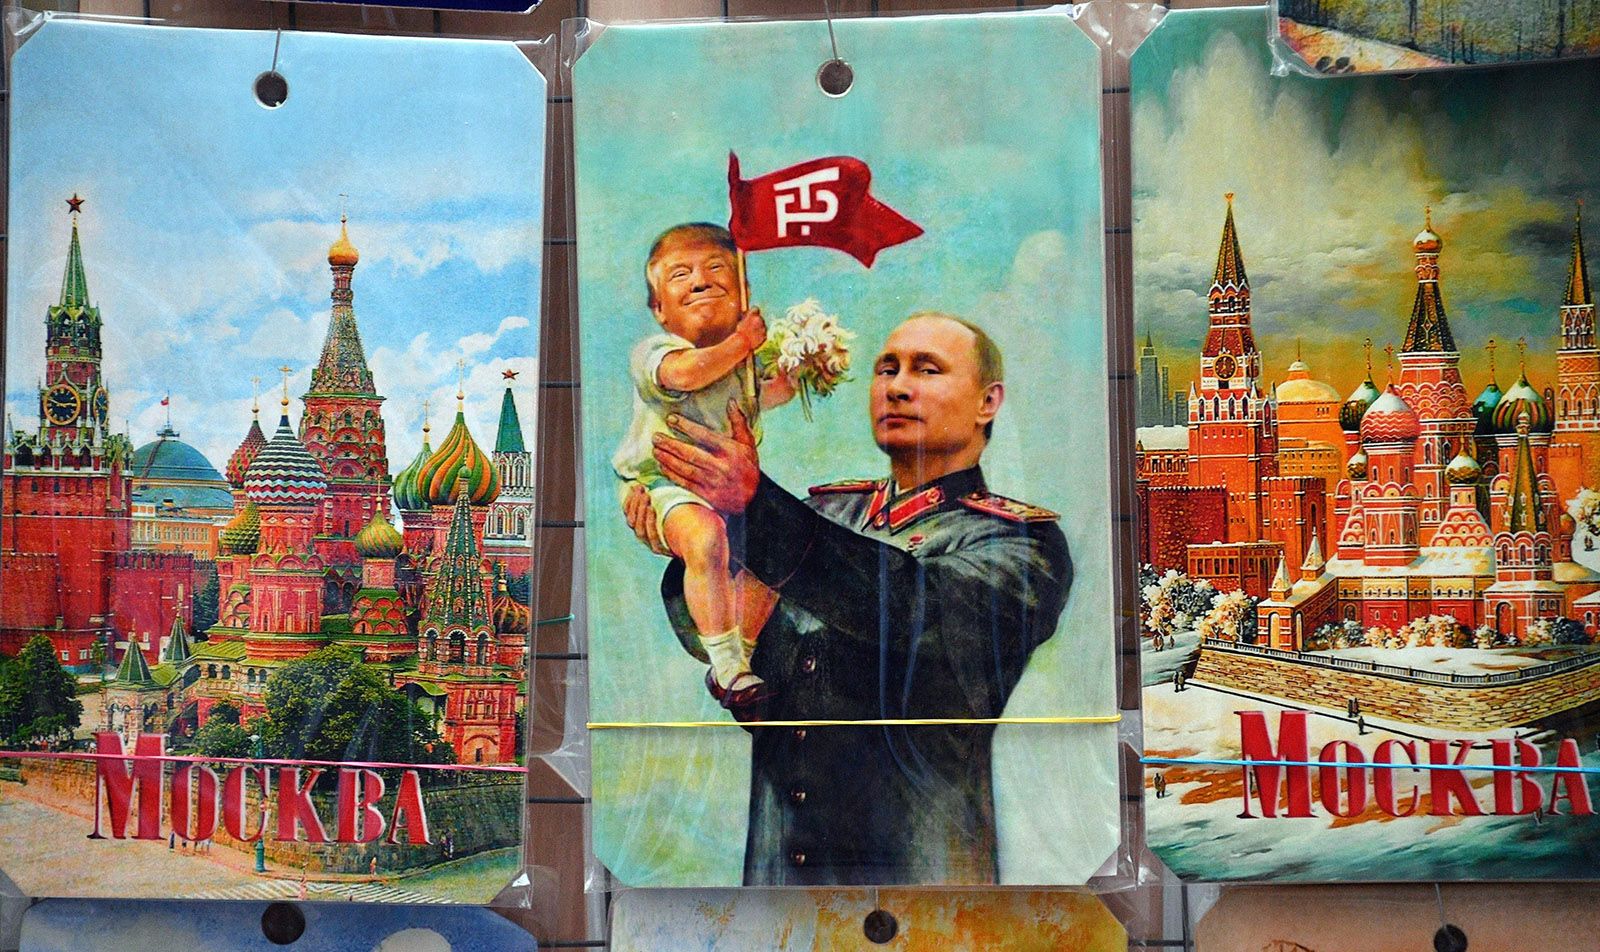 Pictures for sale at a souvenir kiosk in Moscow, Russia, July 2017